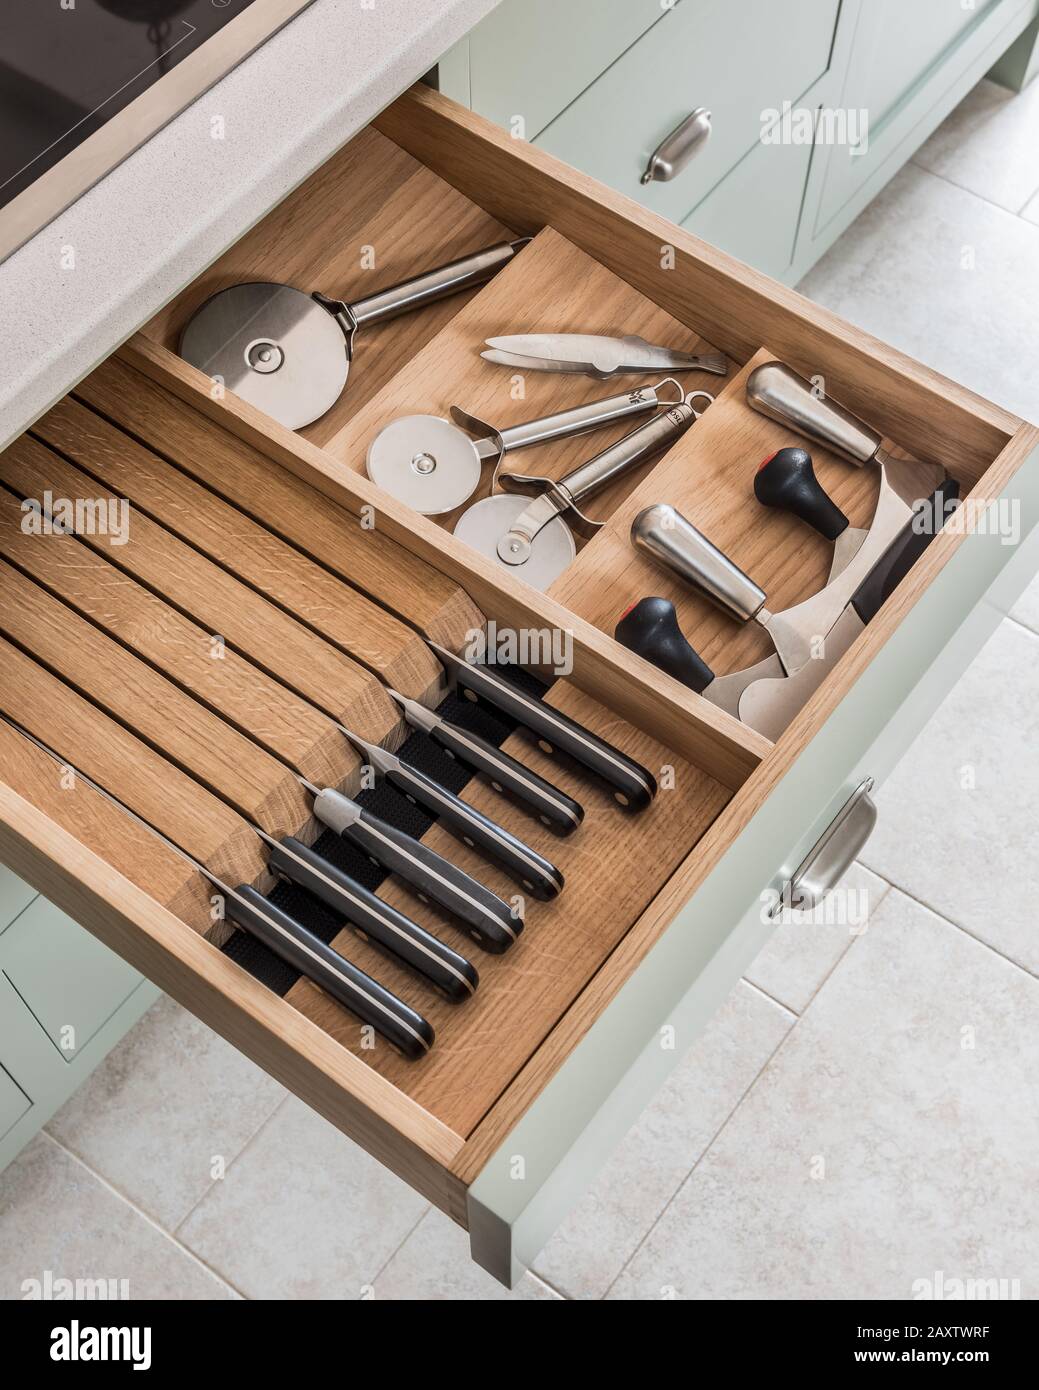 Knives and pizza cutters in open kitchen drawer Stock Photo